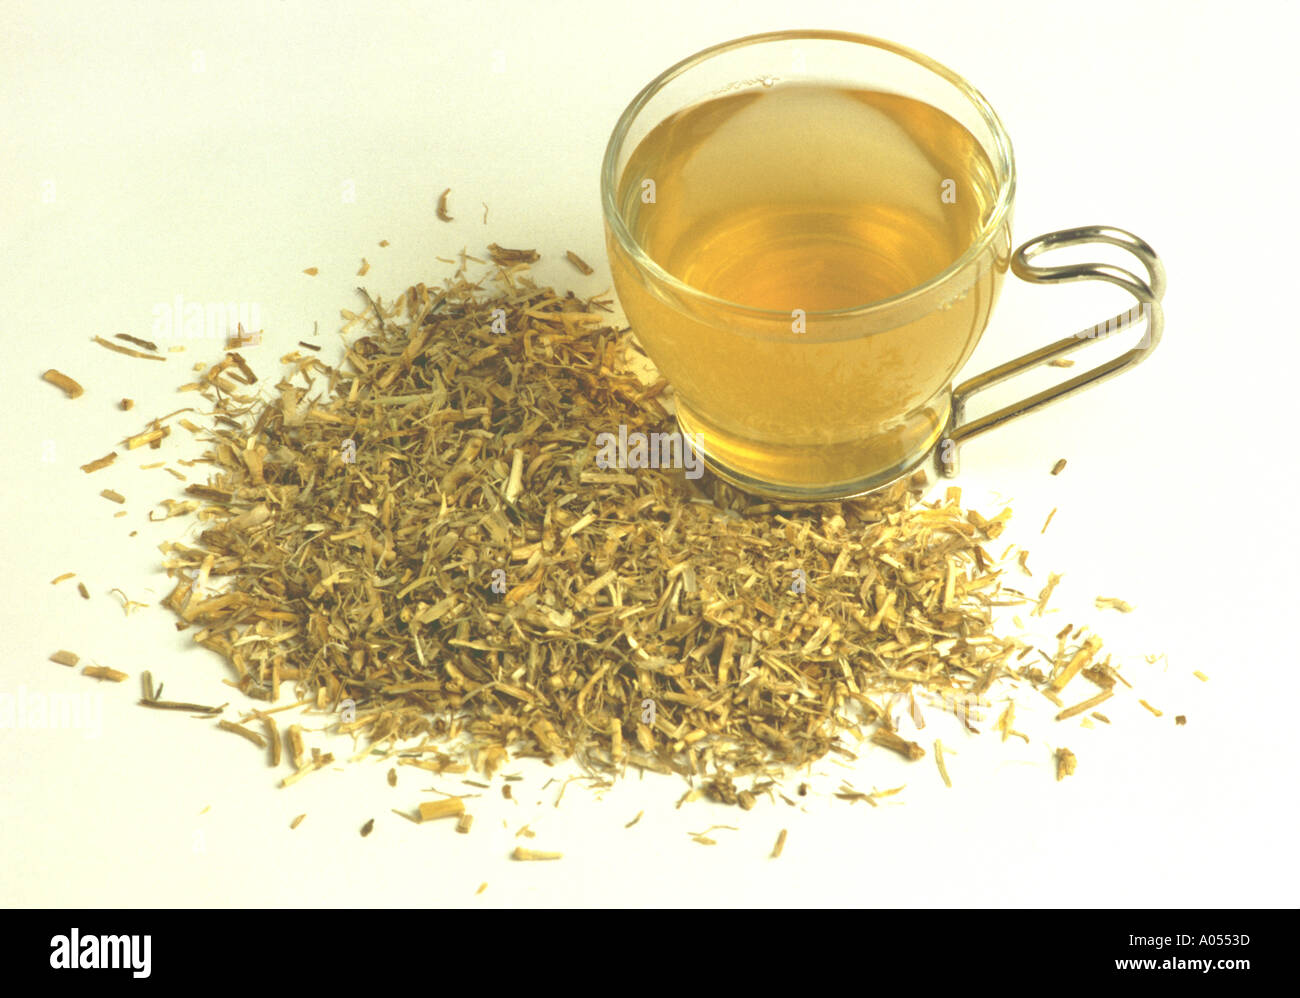 couch grass root tea elymus repens medicinal plant Stock Photo